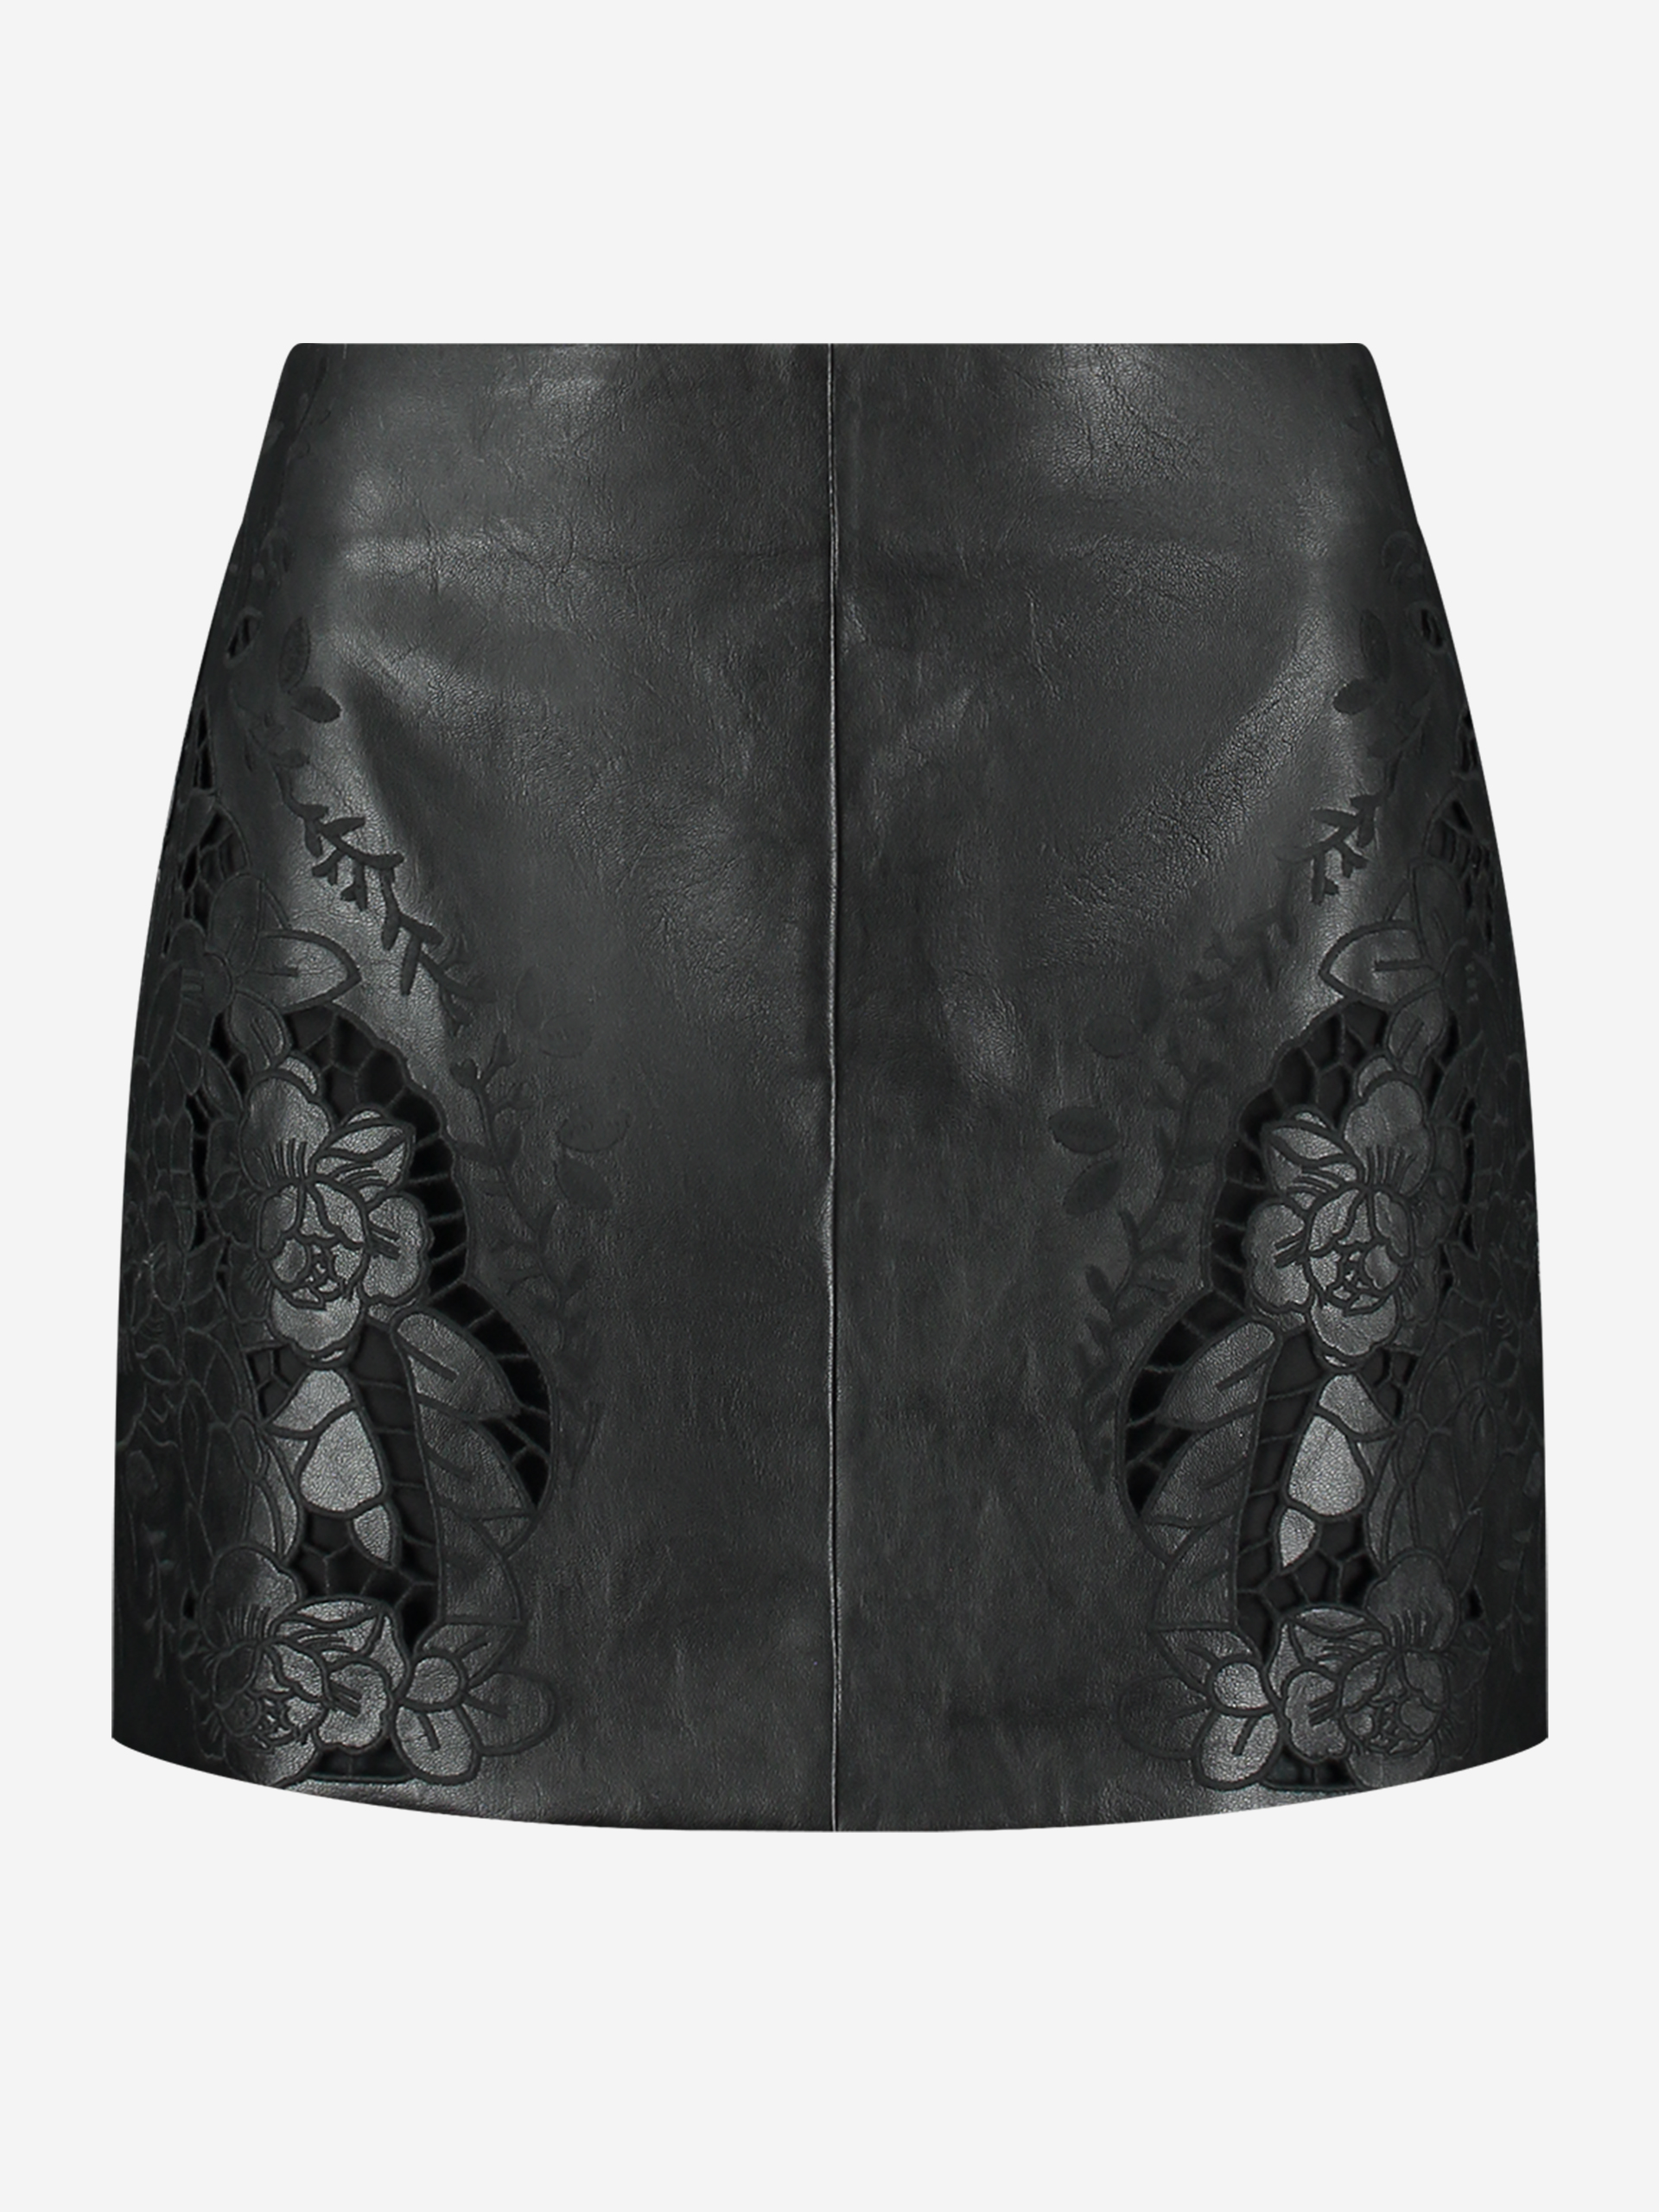 Vegan leather skirt with embroidery details 